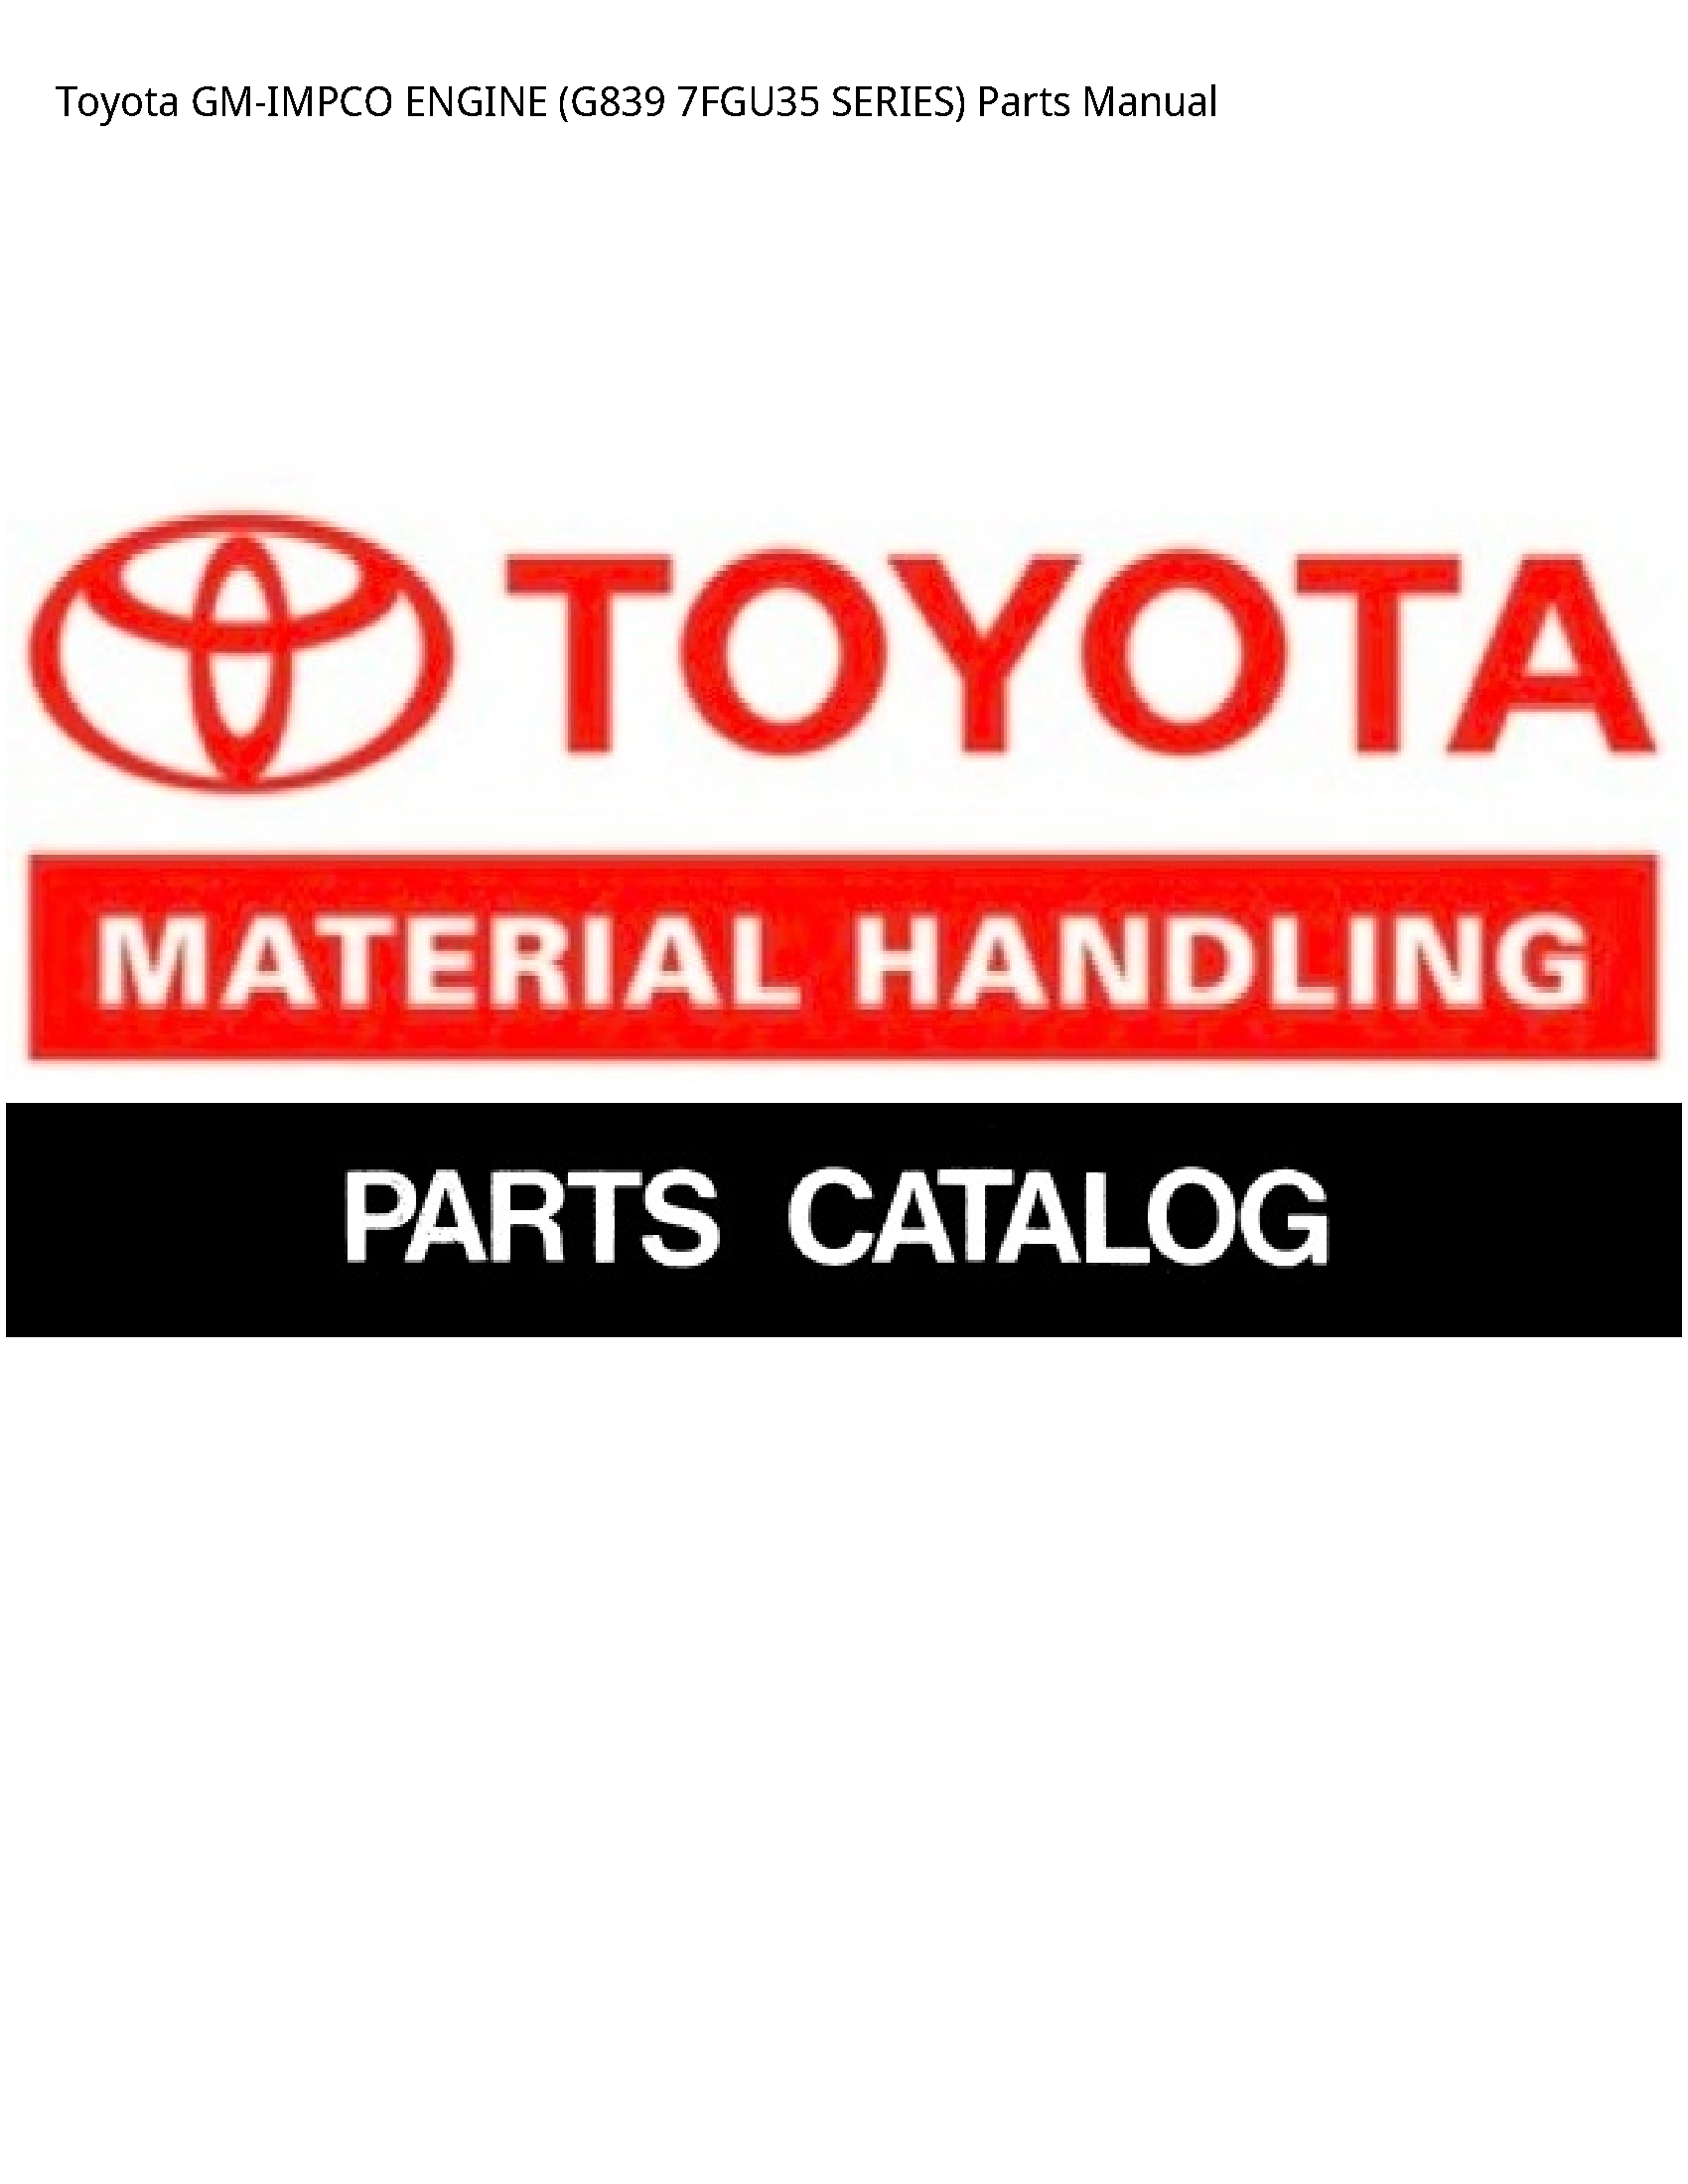 Toyota (G839 GM-IMPCO ENGINE SERIES) Parts manual